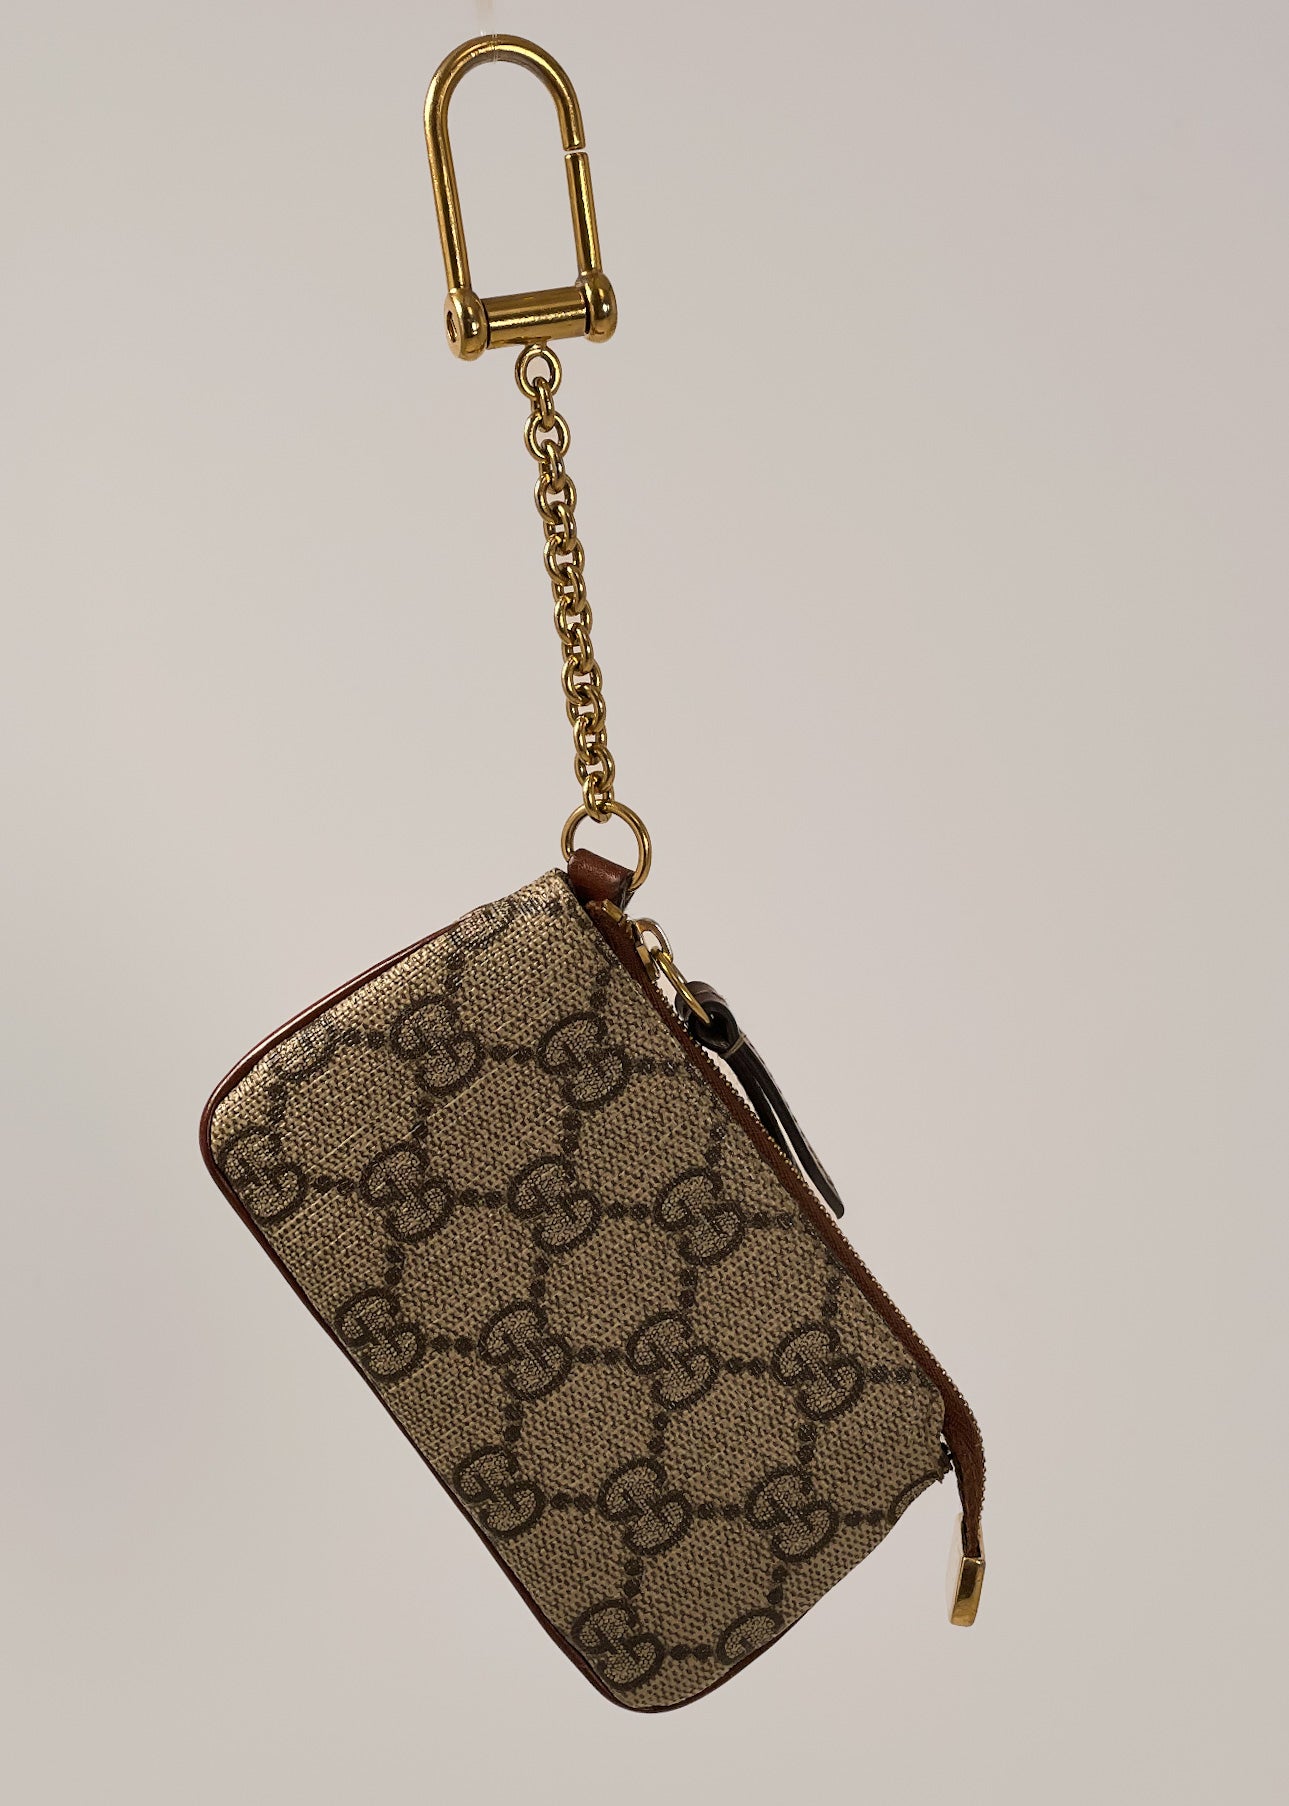 Gucci GG Supreme Key Pouch – Designer Exchange Consignment TO